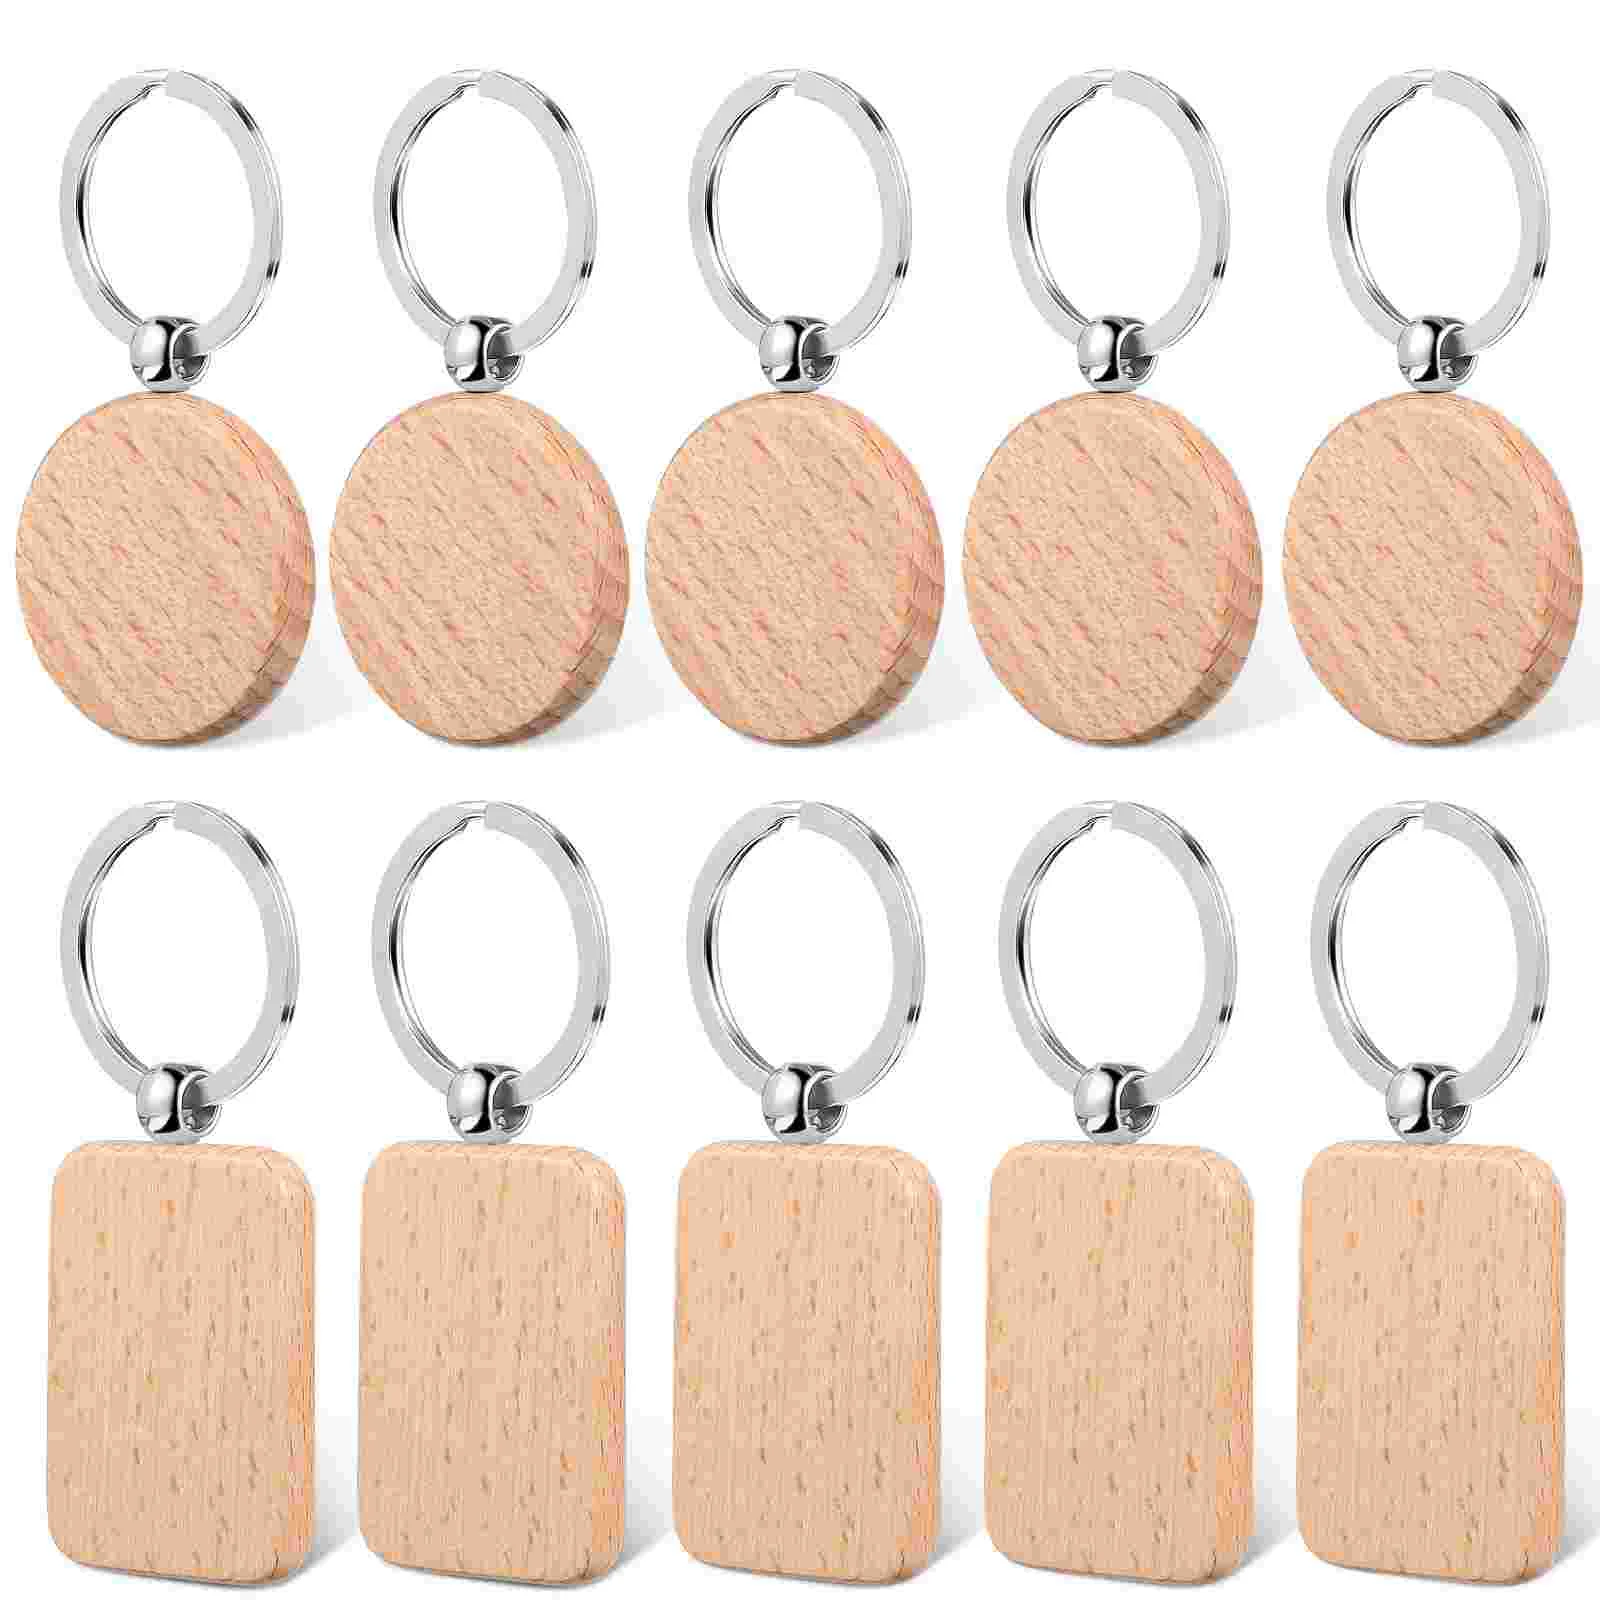 

10 Pcs Wooden Keychain Engraving Blanks Tags Keychains Round Keyrings Natural Slices Rectangle CD Craft Personality Beech Small